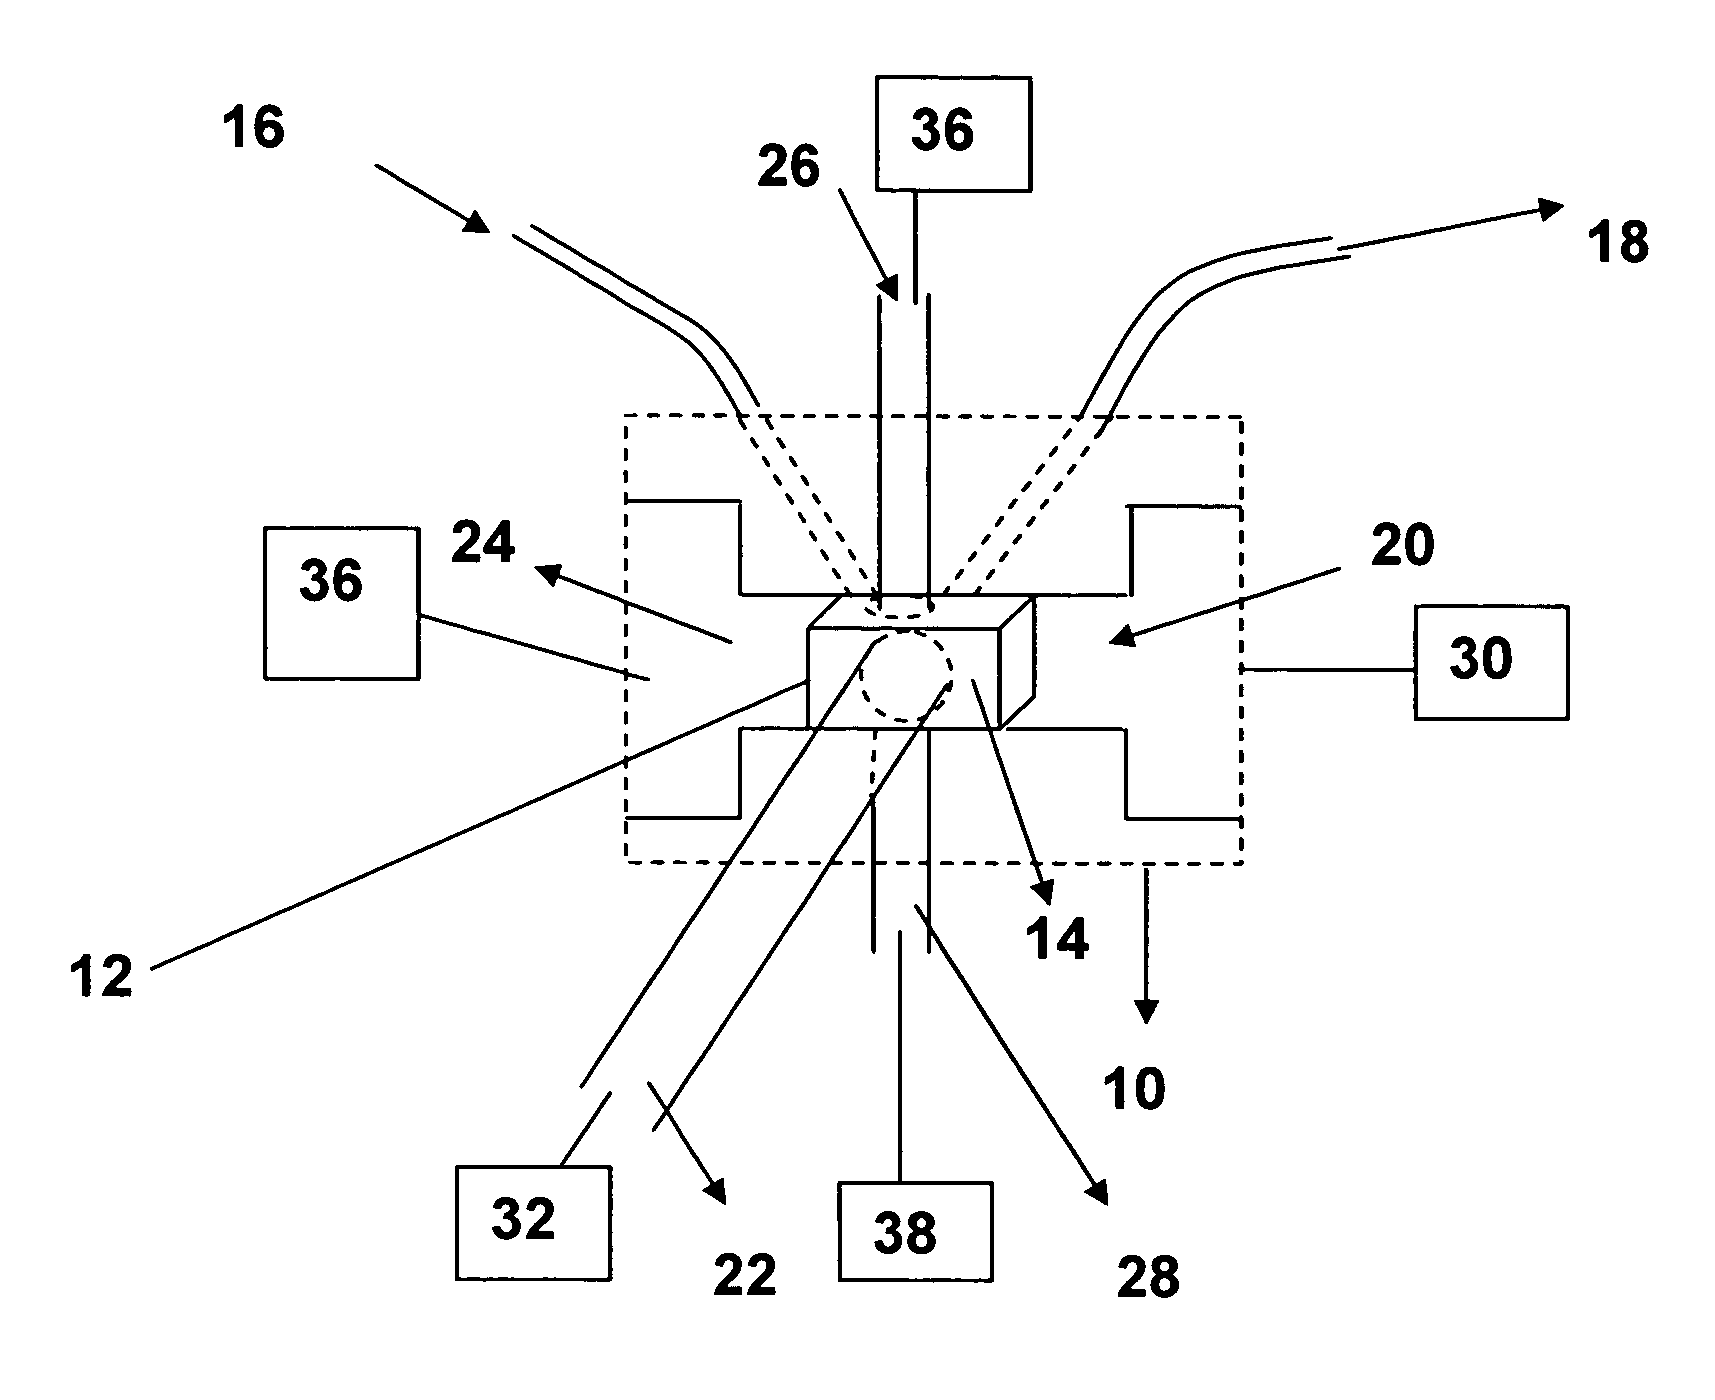 Dual-detector systems and methods having utility in biomolecular measurements